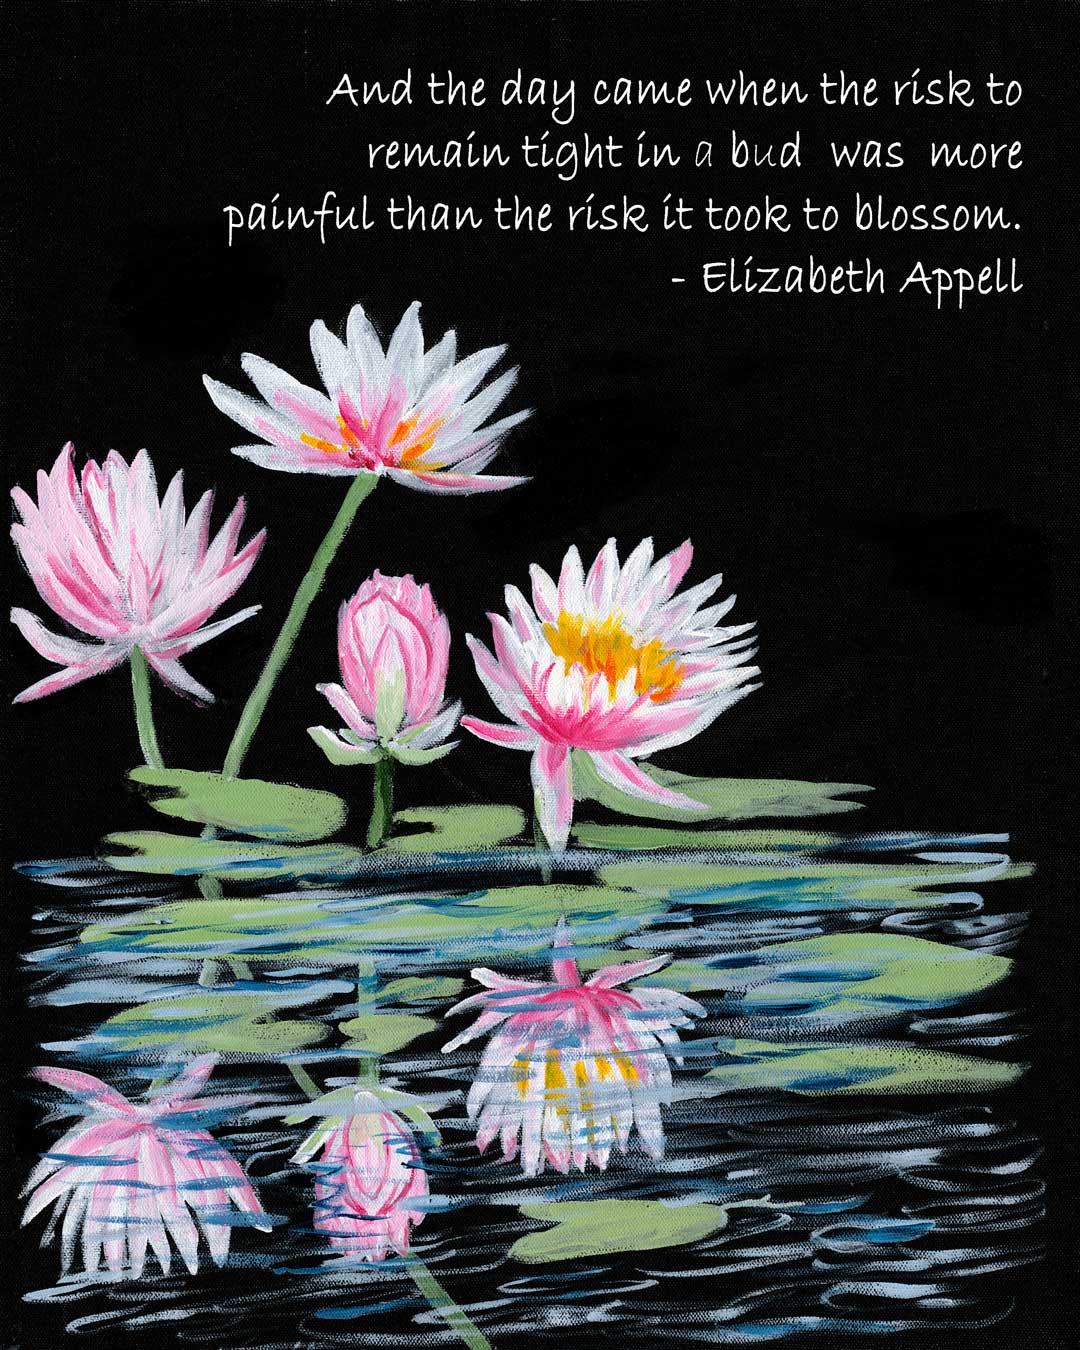 Water lilies with a quote from elizabeth adler.